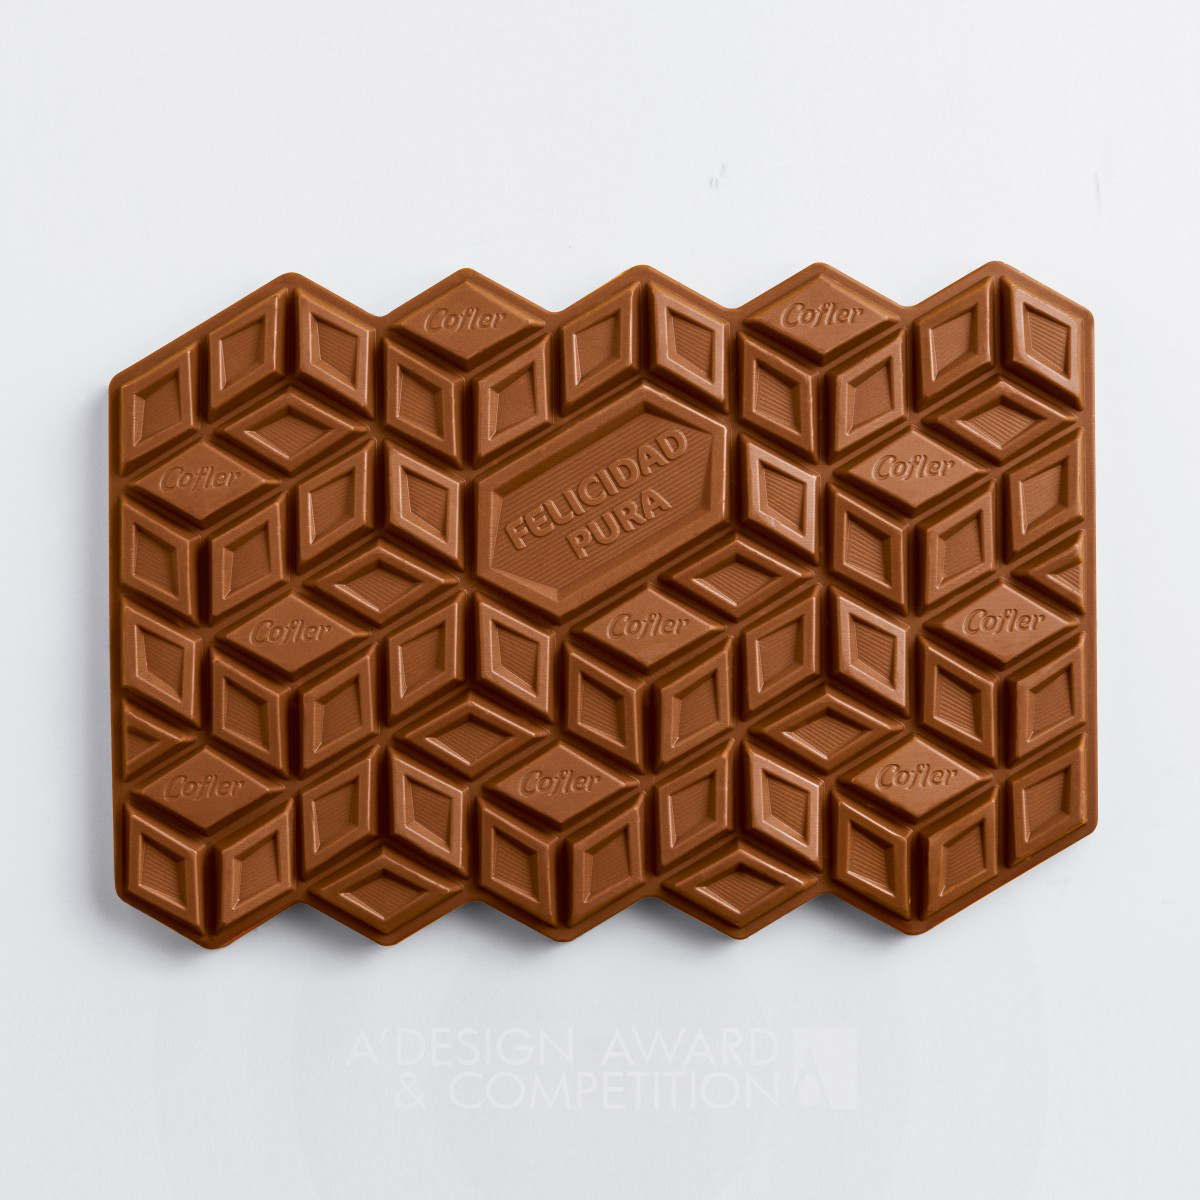 Blockazo Chocolate Bar for Sharing by Guillermo Dufranc